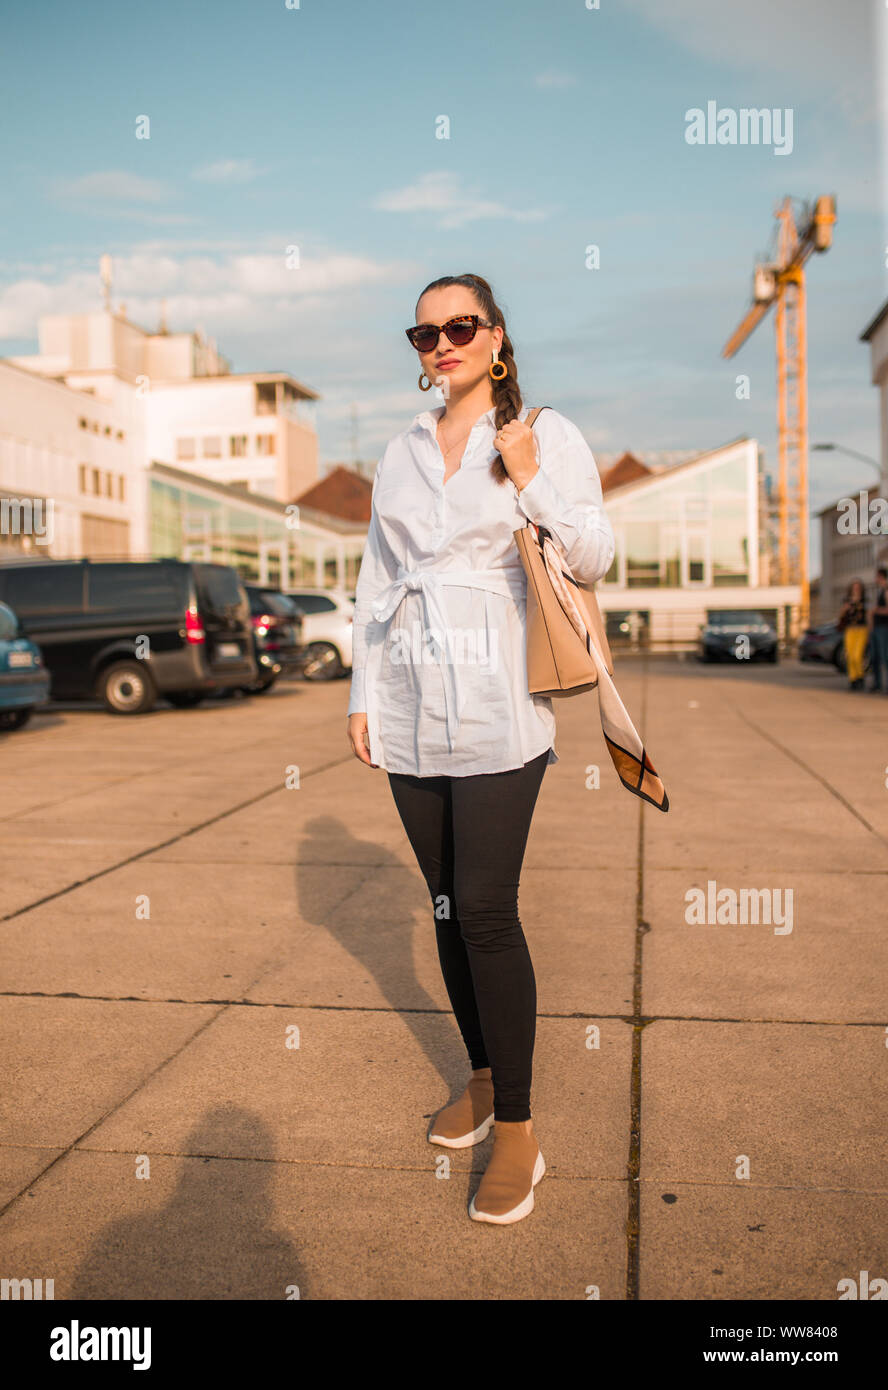 Portrait of young woman standing on sidewalk and holding bag Stock Photo